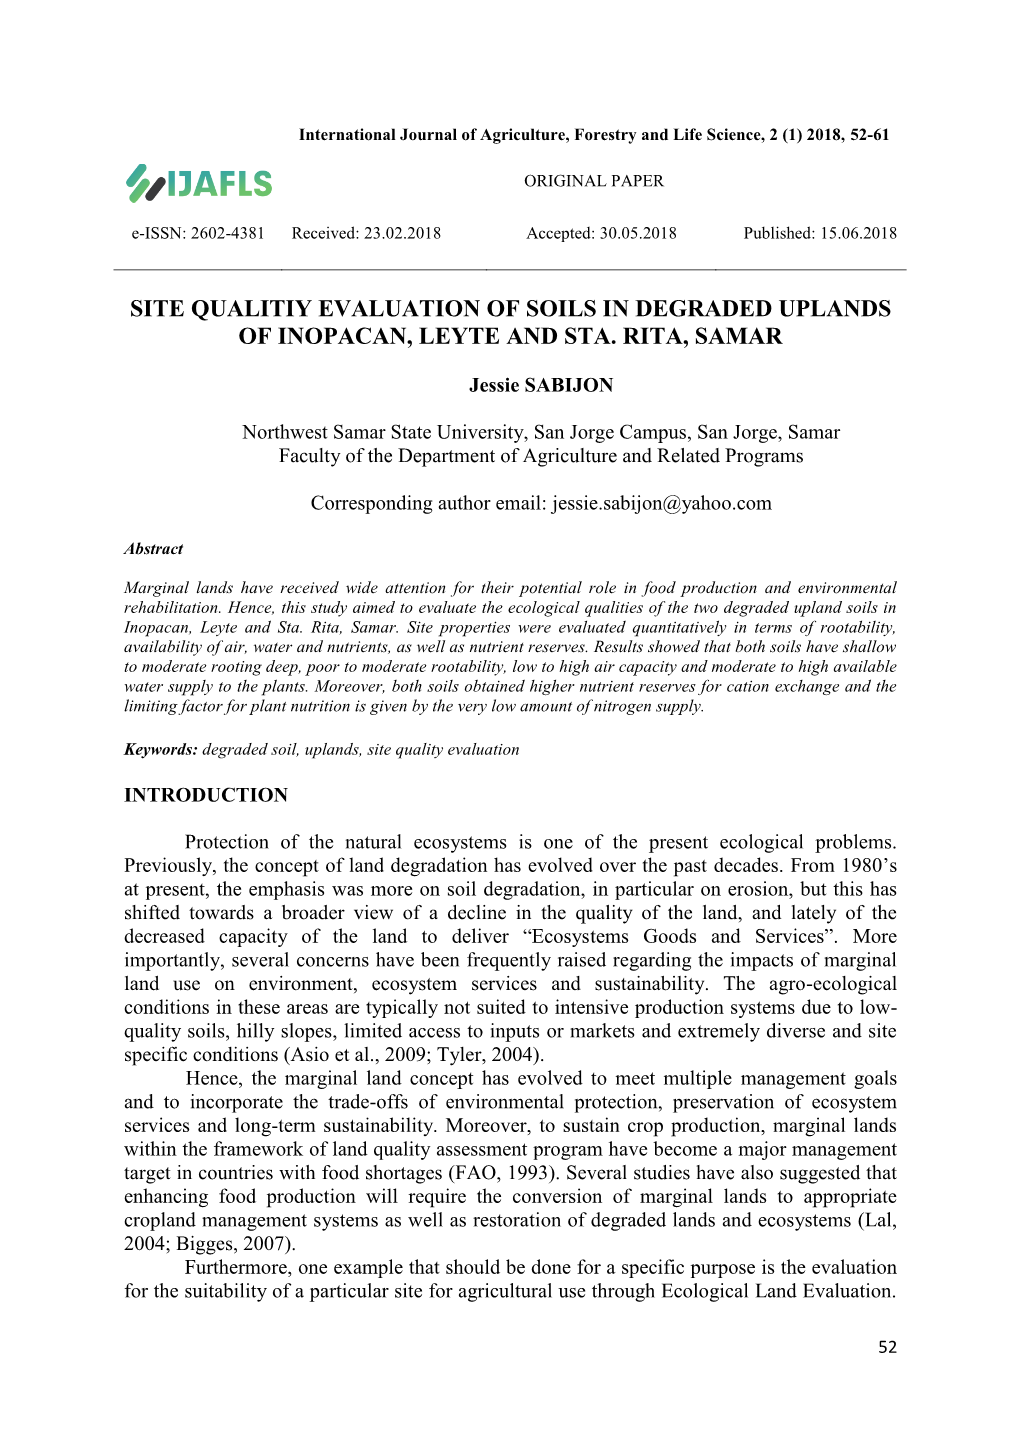 Site Qualitiy Evaluation of Soils in Degraded Uplands of Inopacan, Leyte and Sta